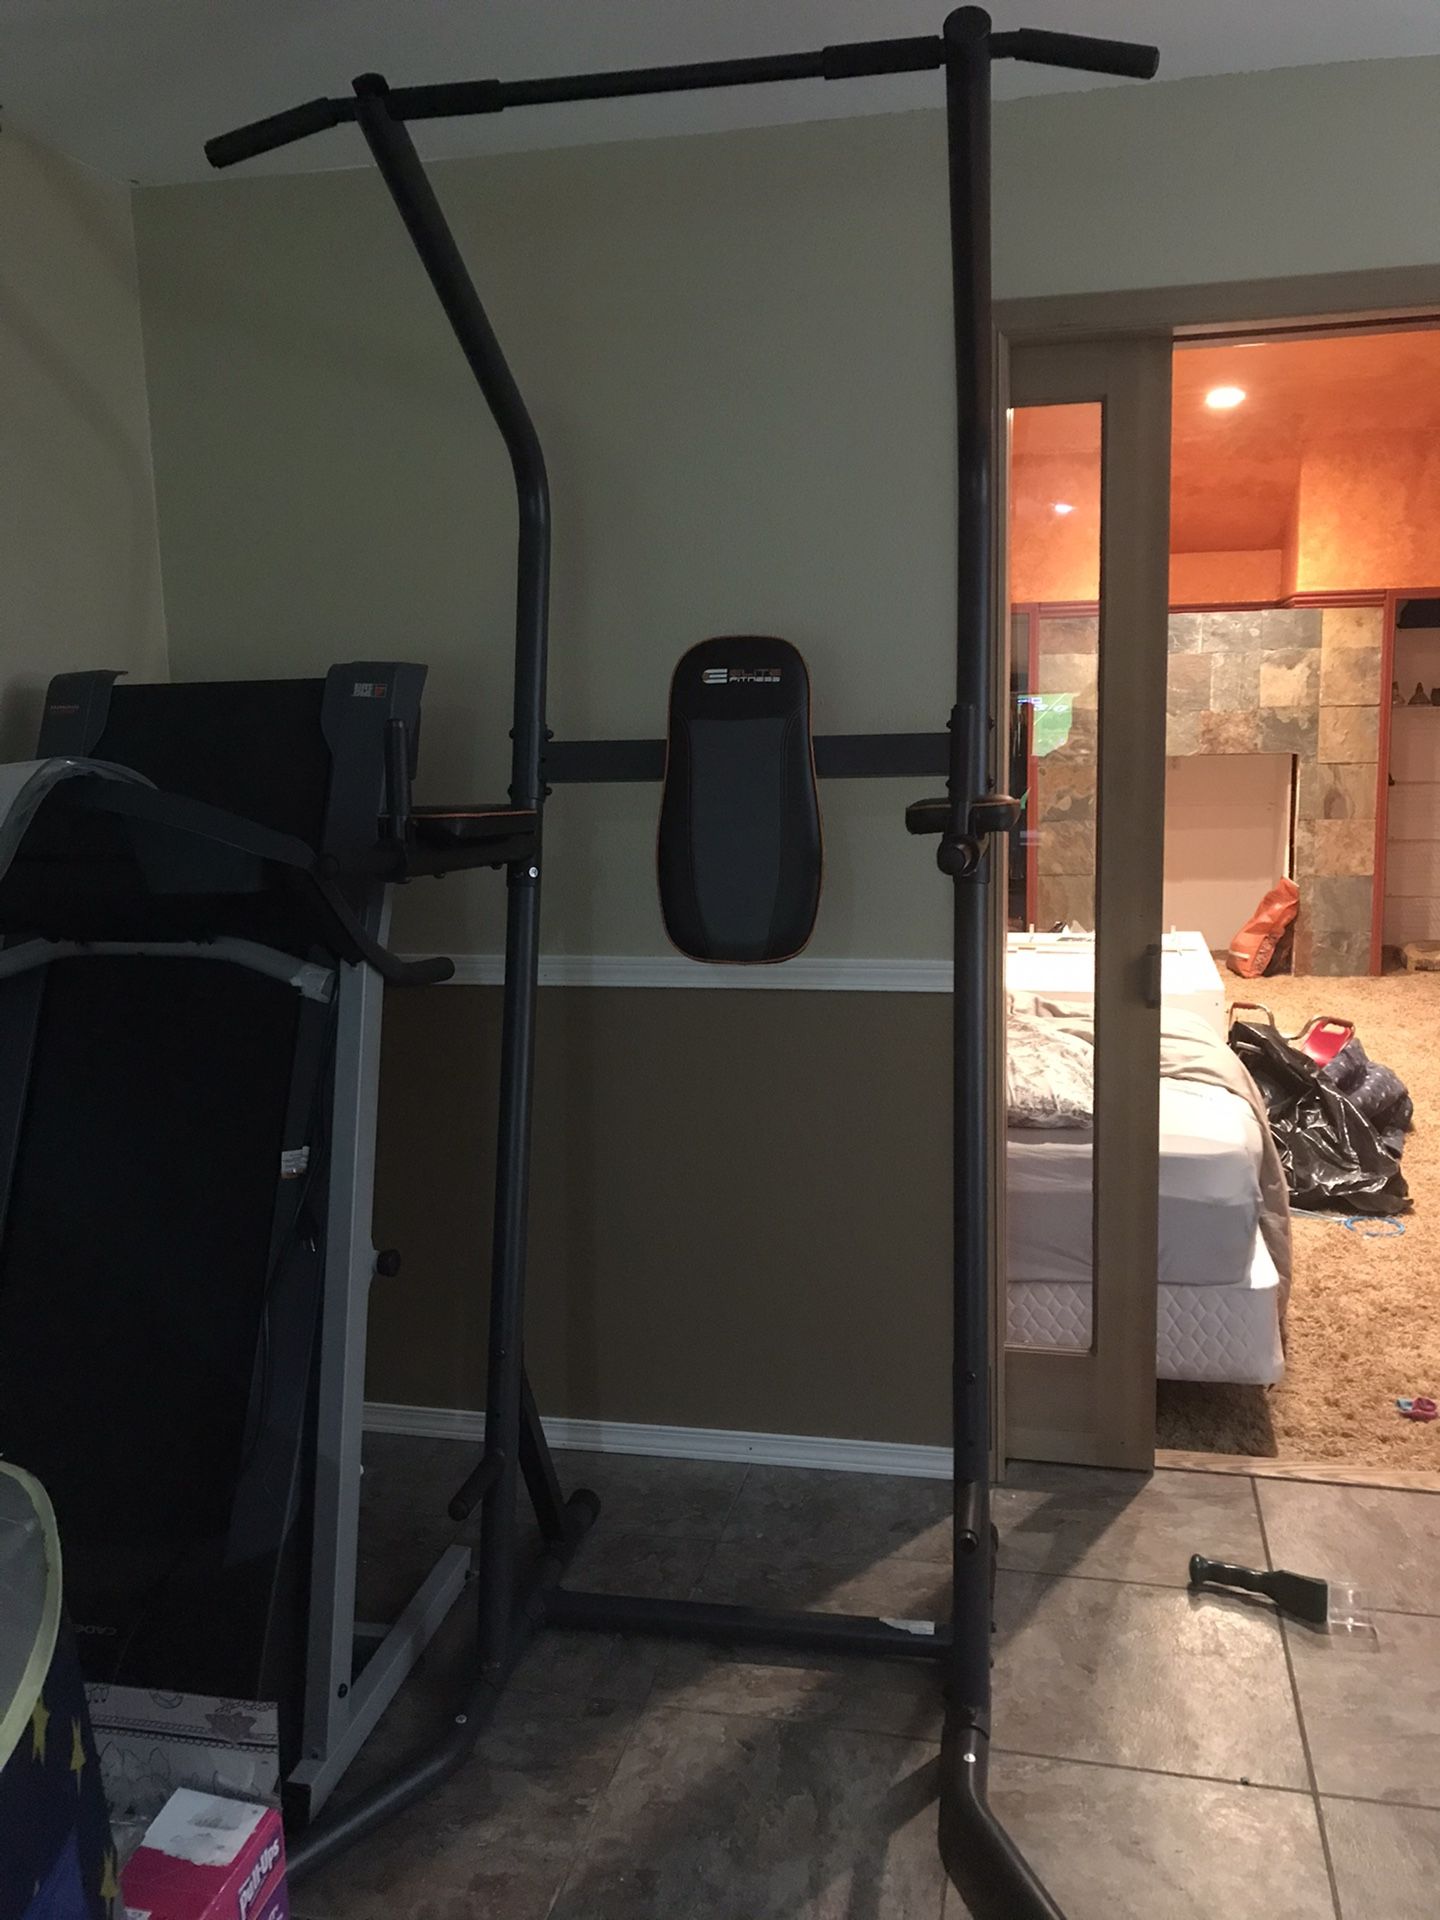 Exercise machine “power tower”